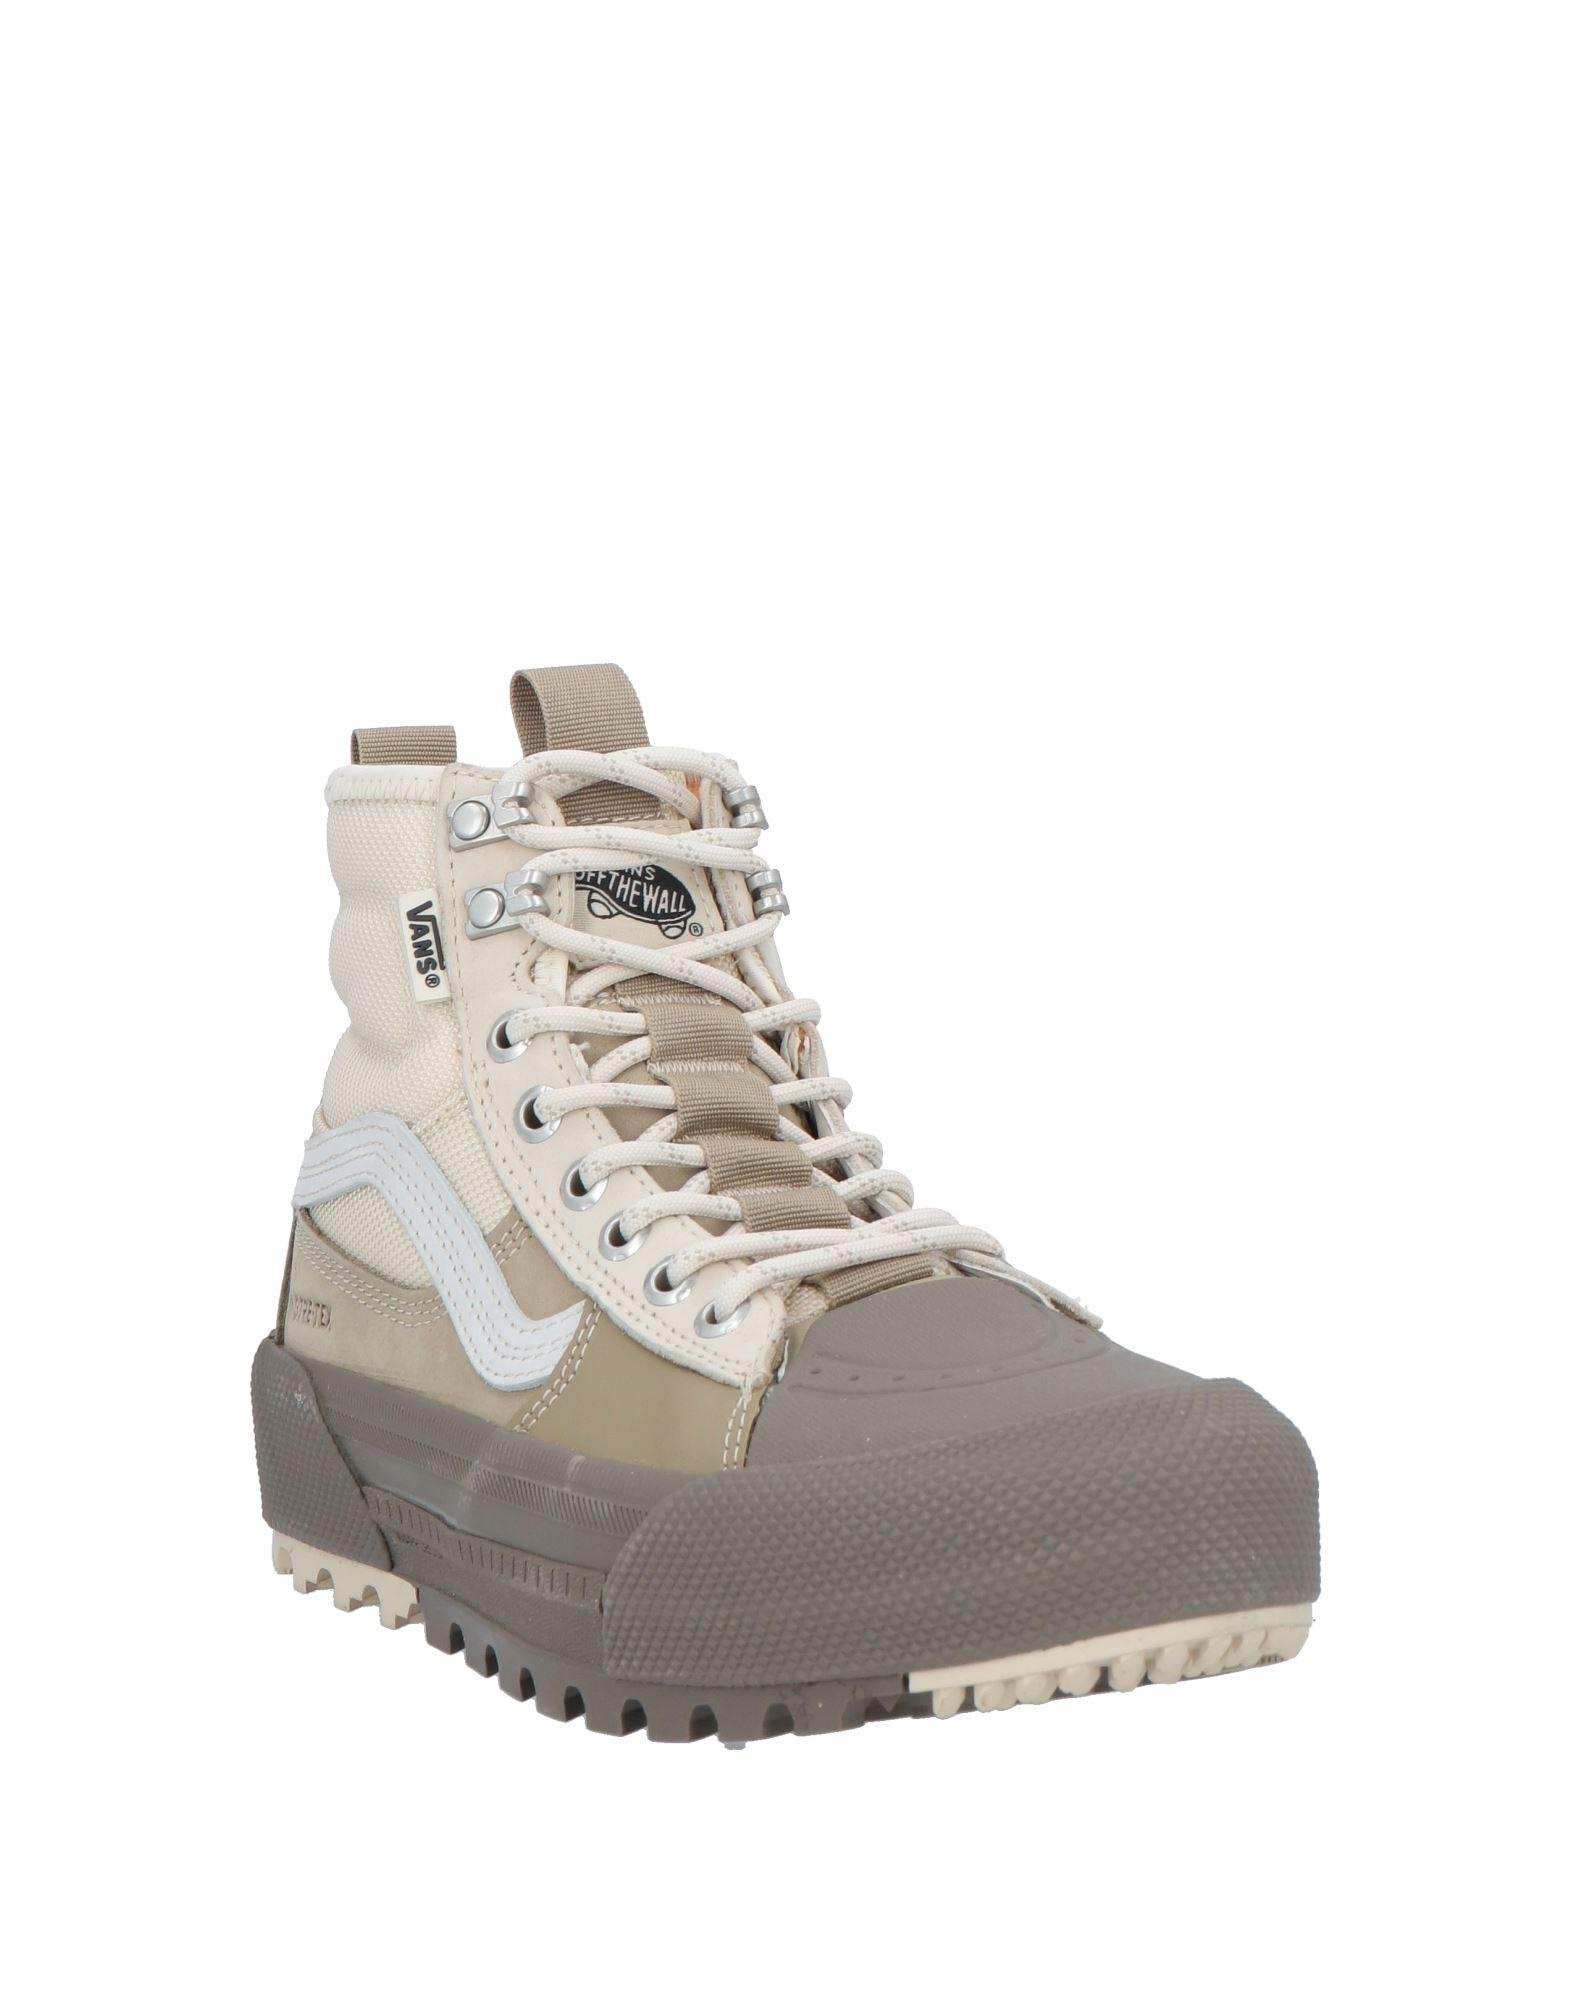 Vans Ankle Boots in Natural | Lyst